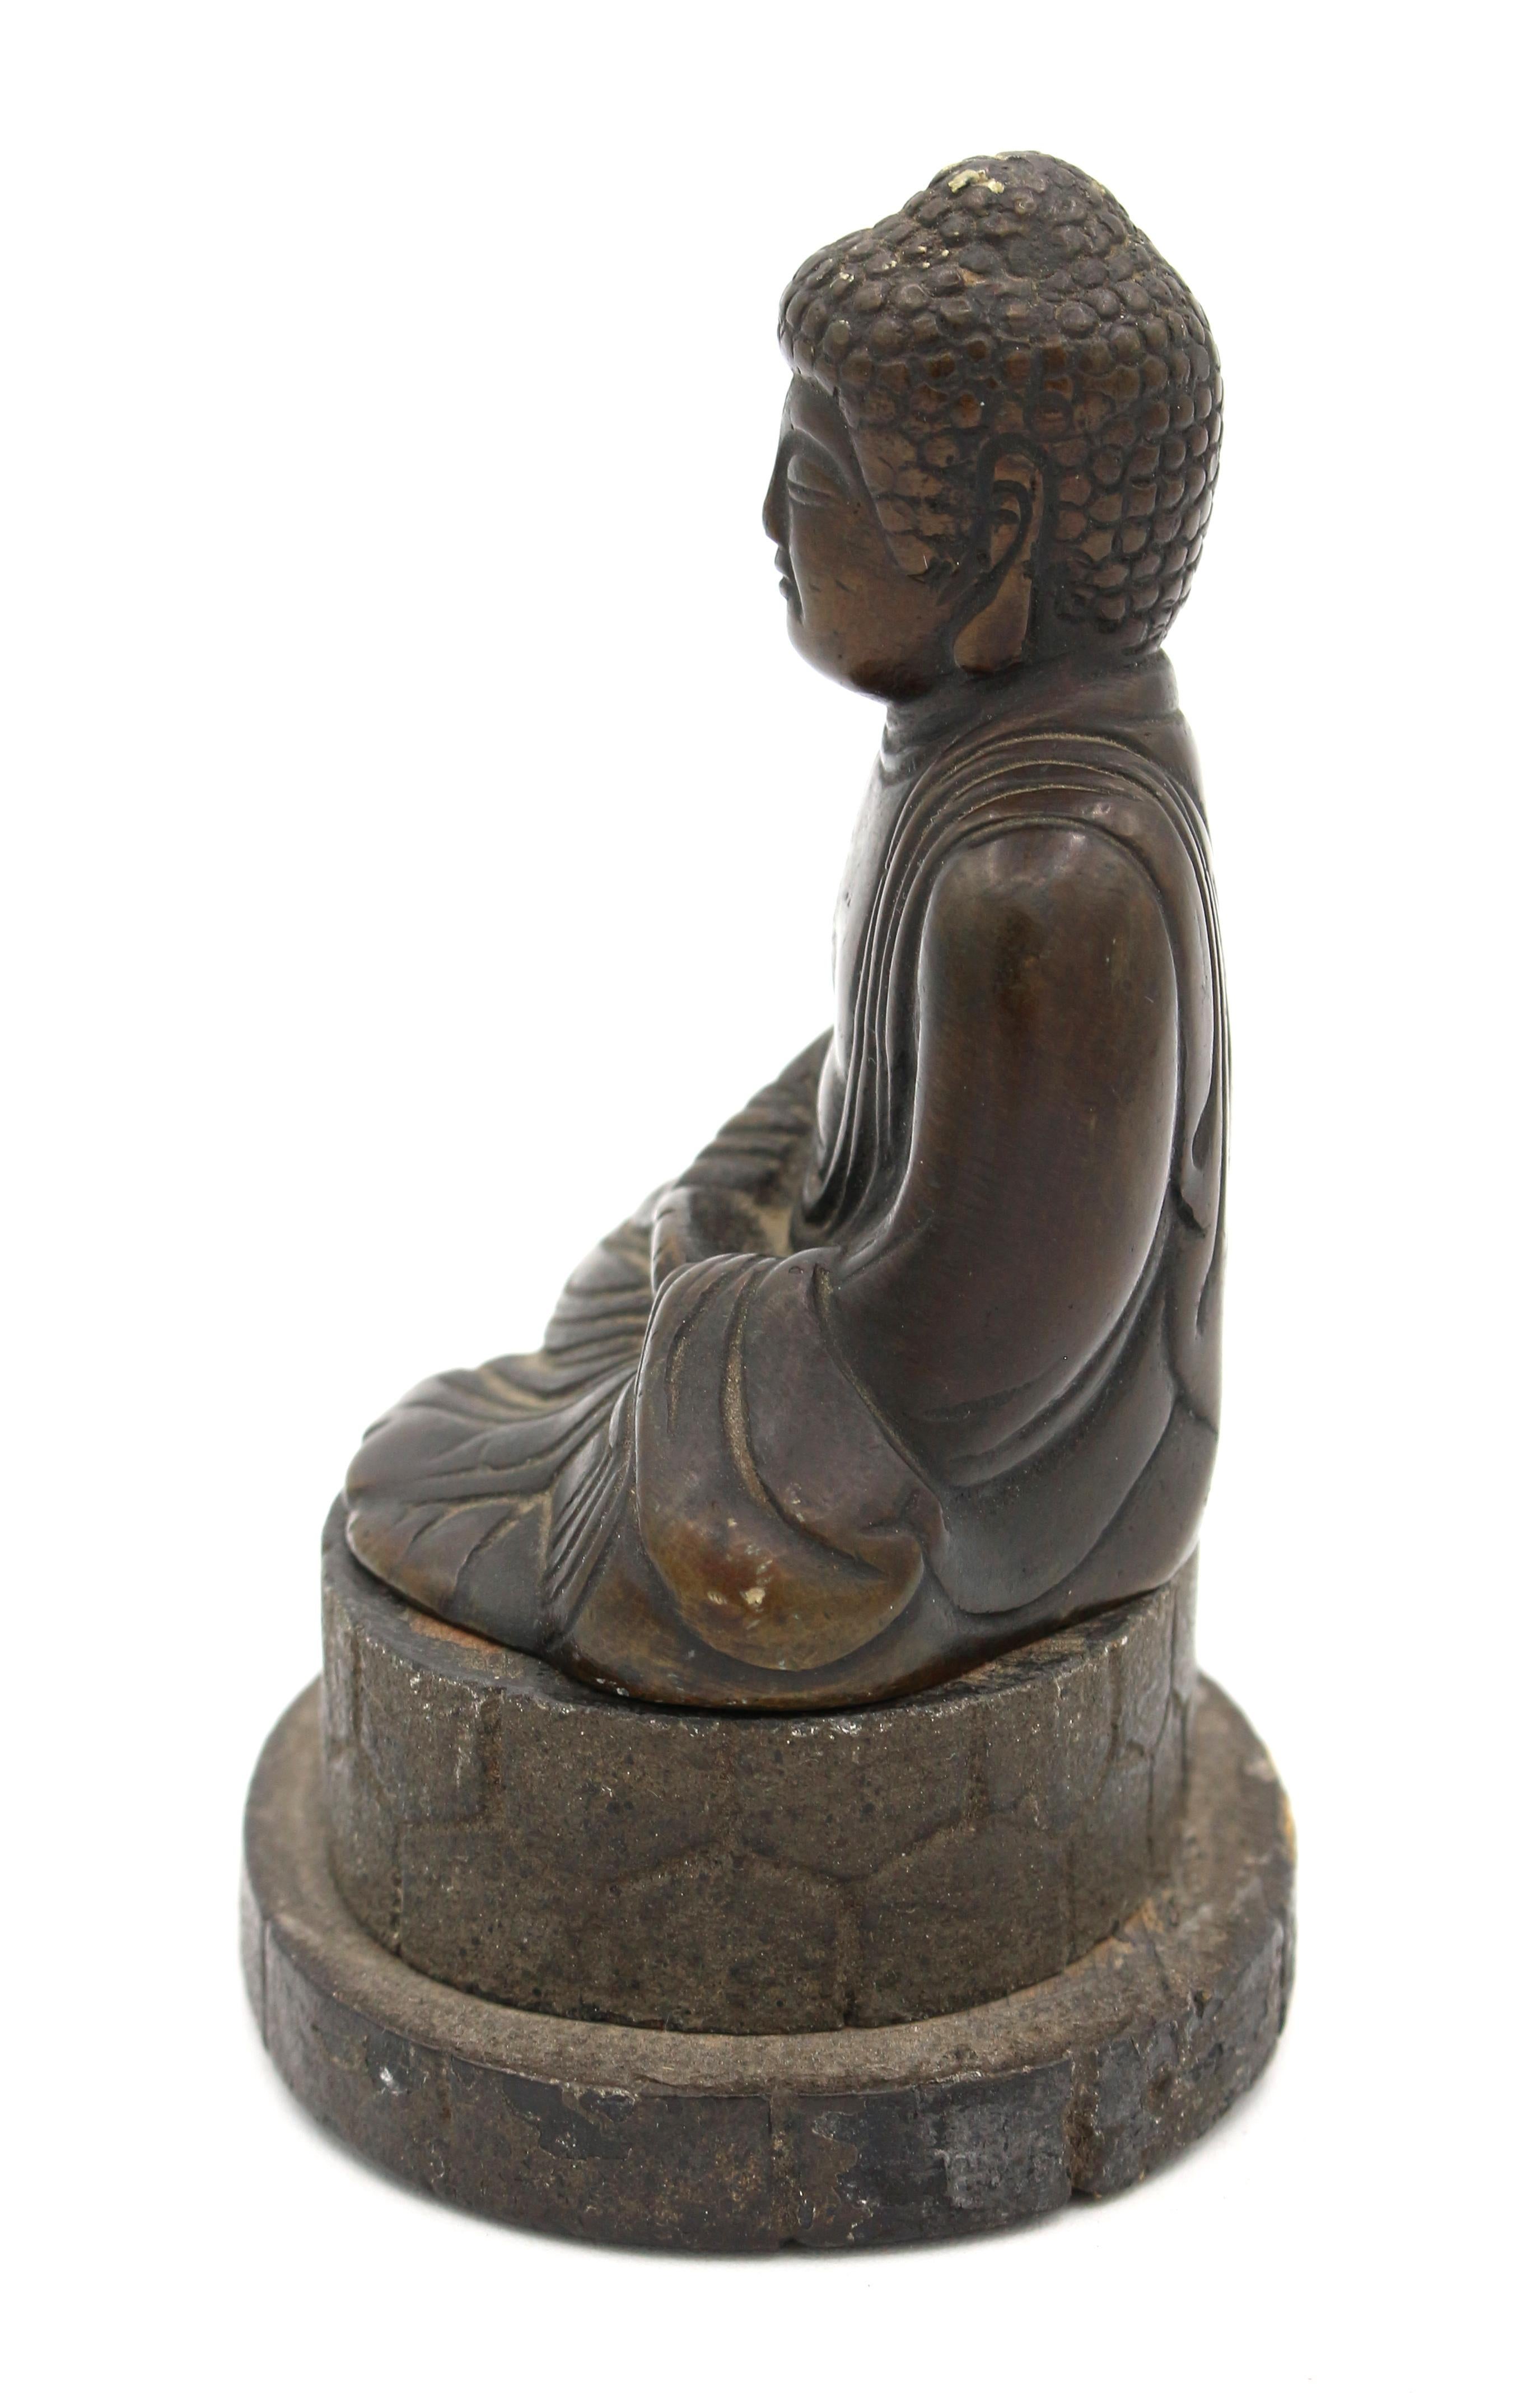 Late 19th century seated bronze meditation Buddha, Qing Dynasty. Lovely patination and nicely detailed. With a charming wooden faux stone stand (not attached).
Figure: 2.75